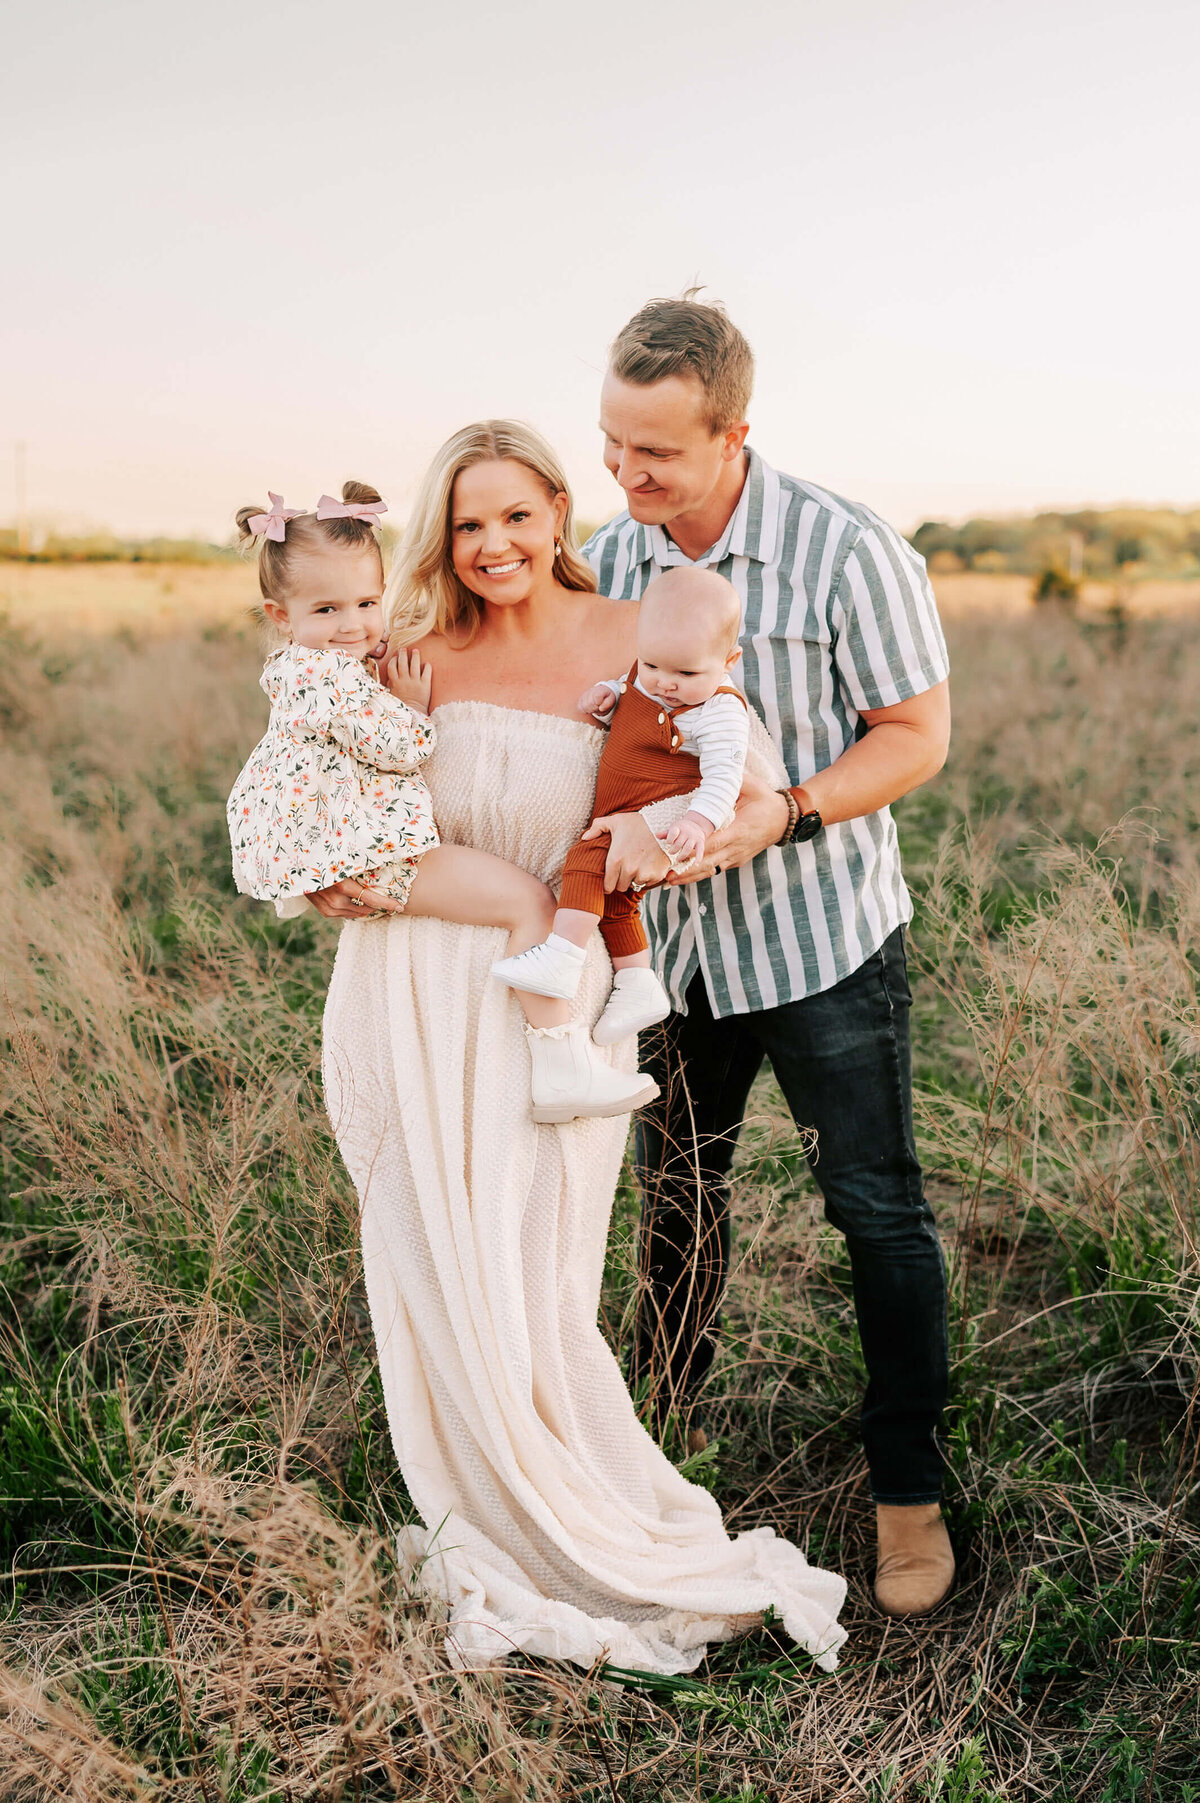 Springfield MO family photographer Jessica Kennedy of The XO Photography captures family cuddling at sunset